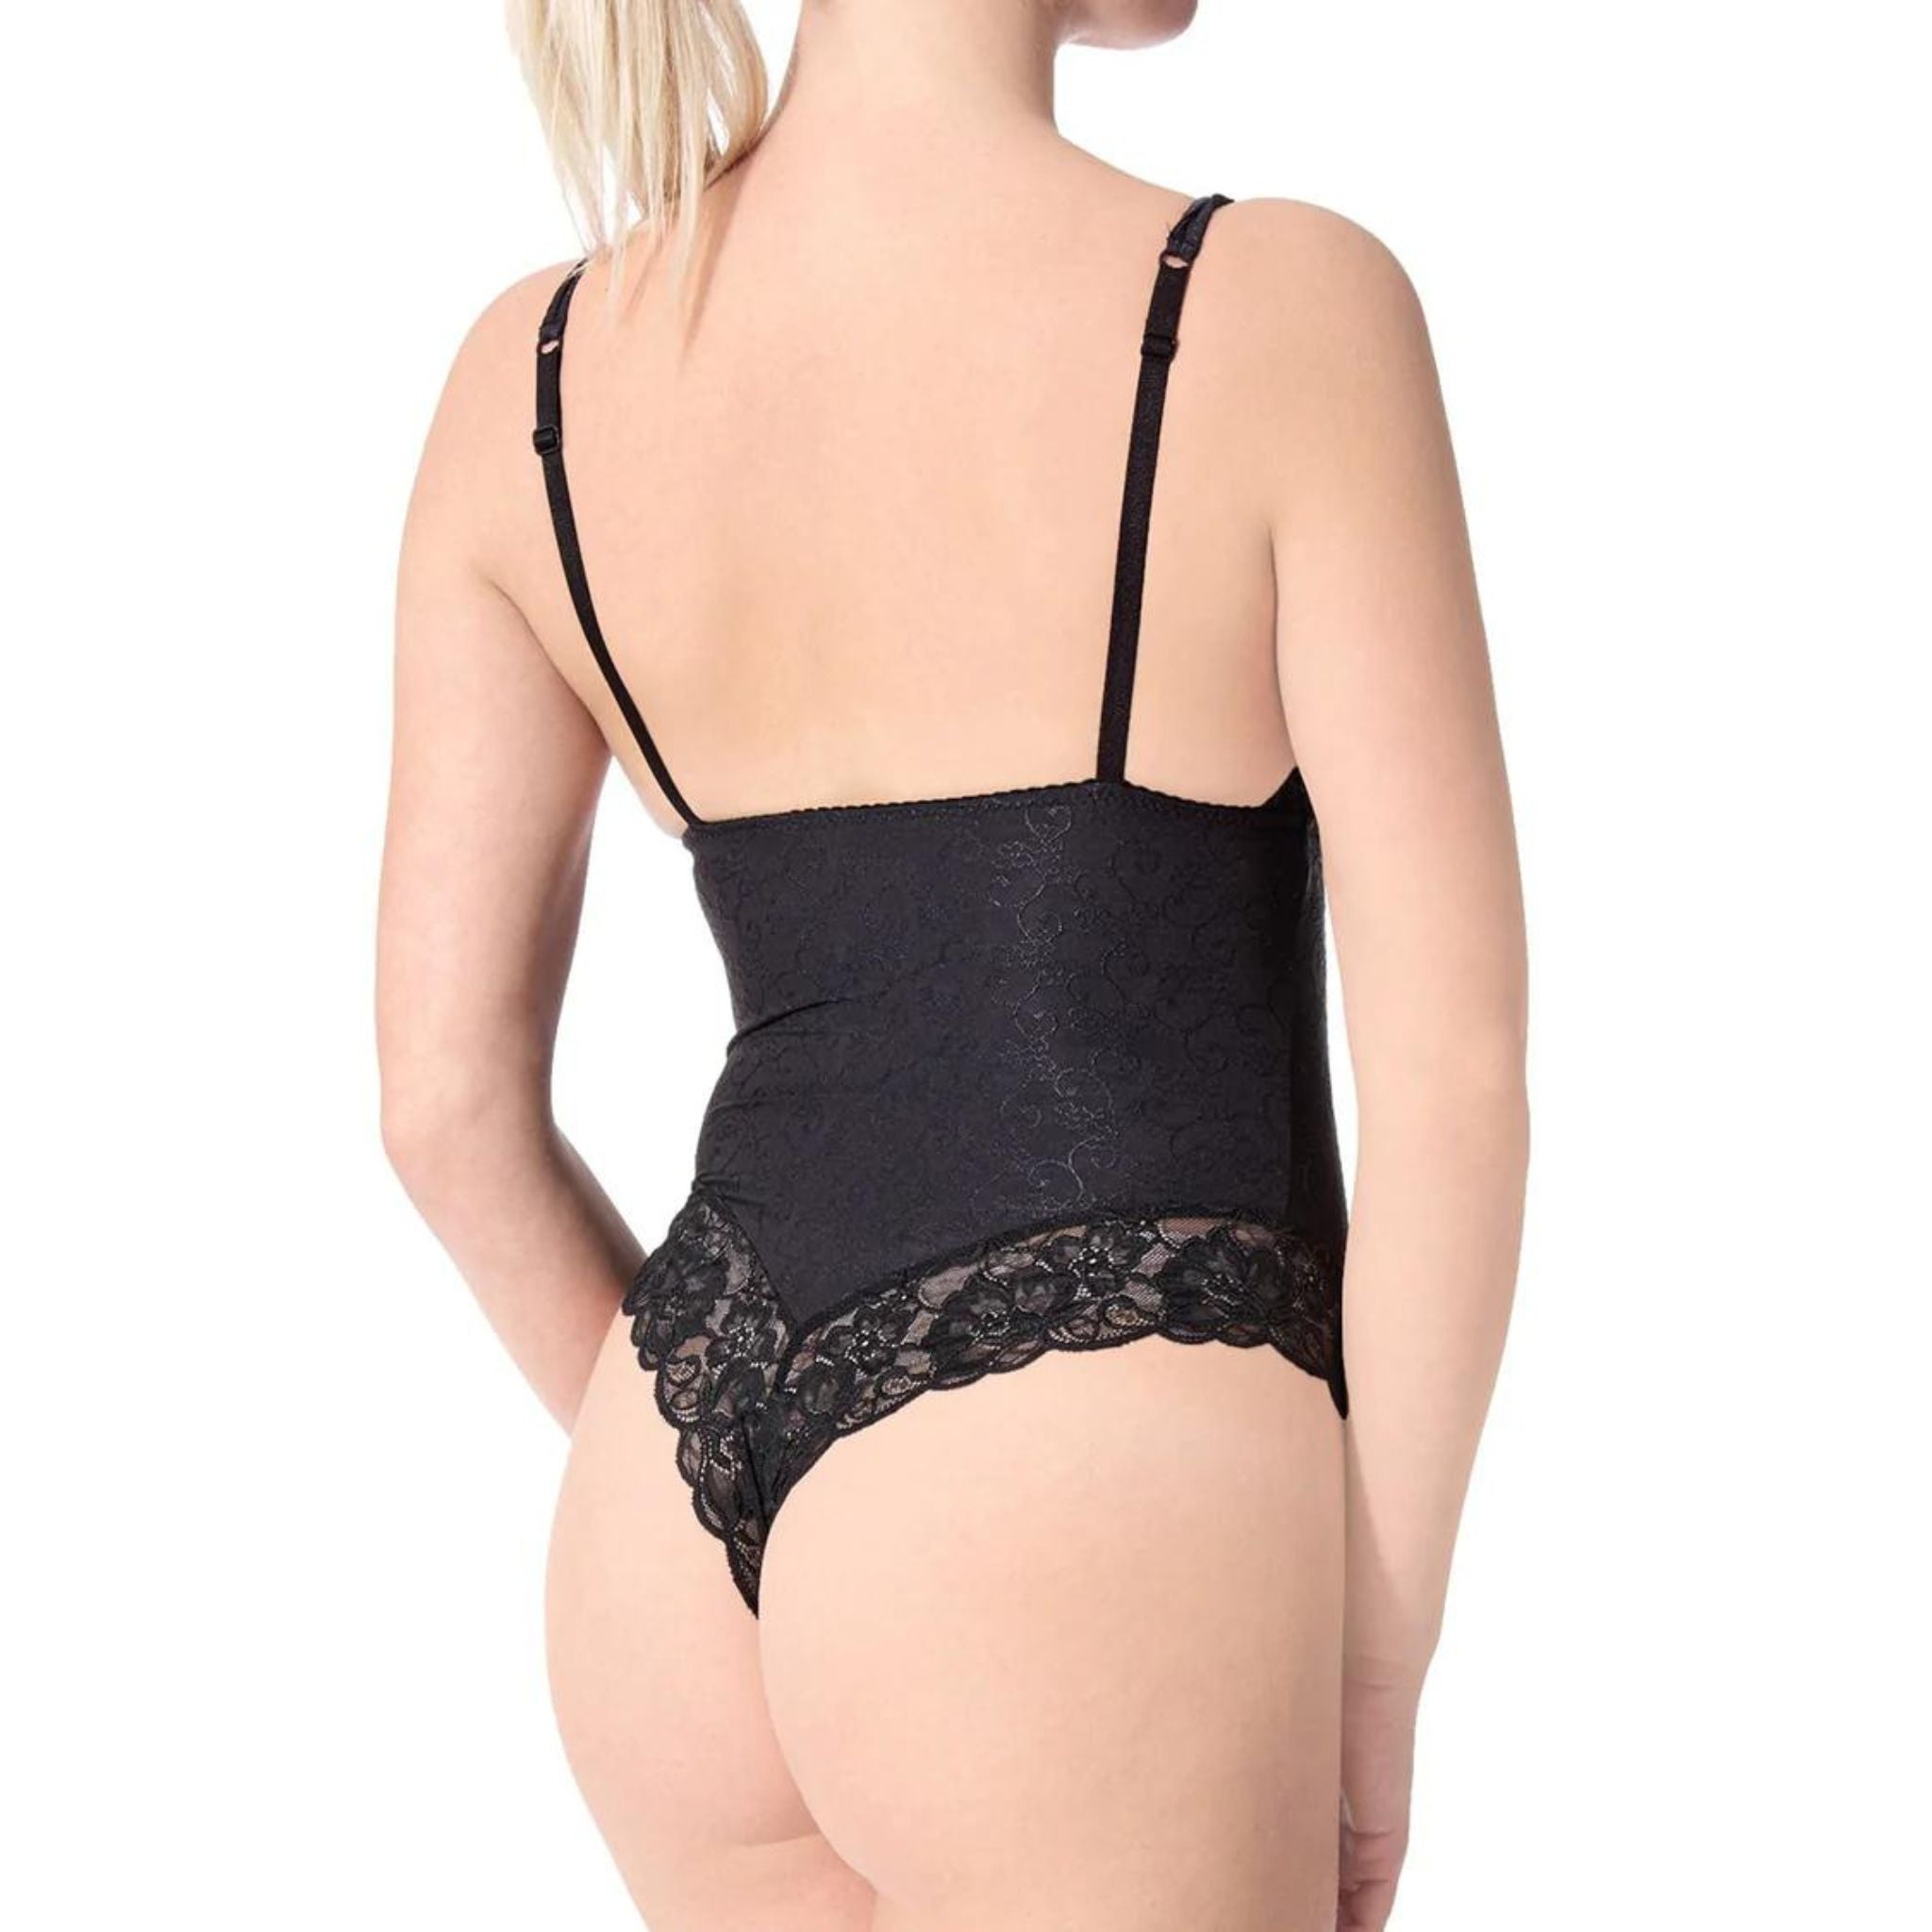 Let yourself be seduces by this simply elegant lace bodysuit. Featuring a v neckline, adjustable shoulder straps, lace cups, a cheeky thong cut and a snap closure cotton gusset. Top and edges made in a delicate floral lace. Body made in a smooth, stretch micro nylon jacquard.  Fabric: 87% Nylon 13% Elastane  Machine wash. Delicate cycle. Hang to dry.  Made in Canada